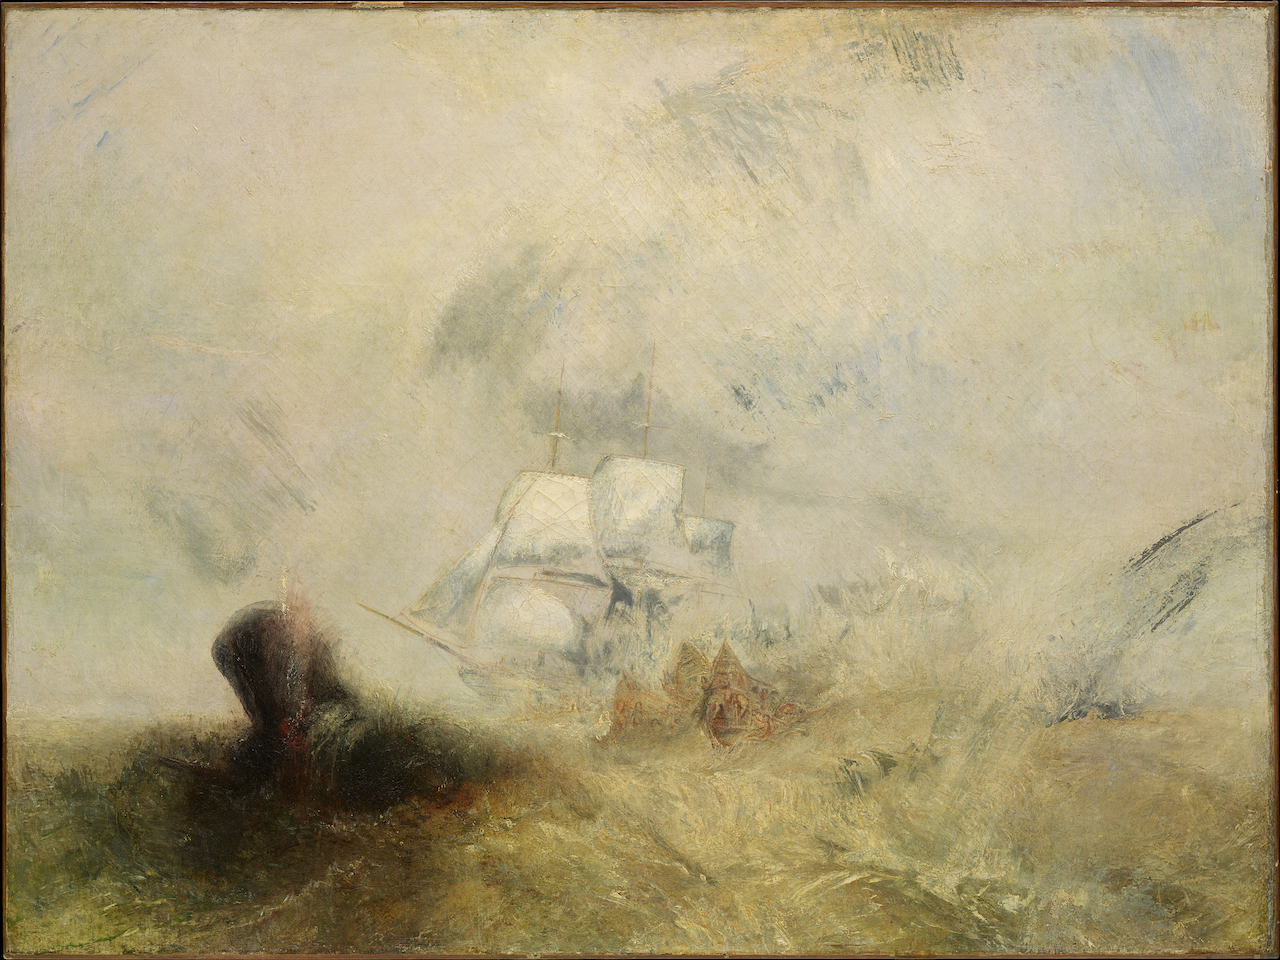 The Wick - J. M. W. Turner RA, Whalers, c. 1845
Oil on canvas, 91.8 x 122.6 cm
Lent by The Metropolitan Museum of Art, New York, Catharine Lorillard Wolfe Collection, Wolfe Fund